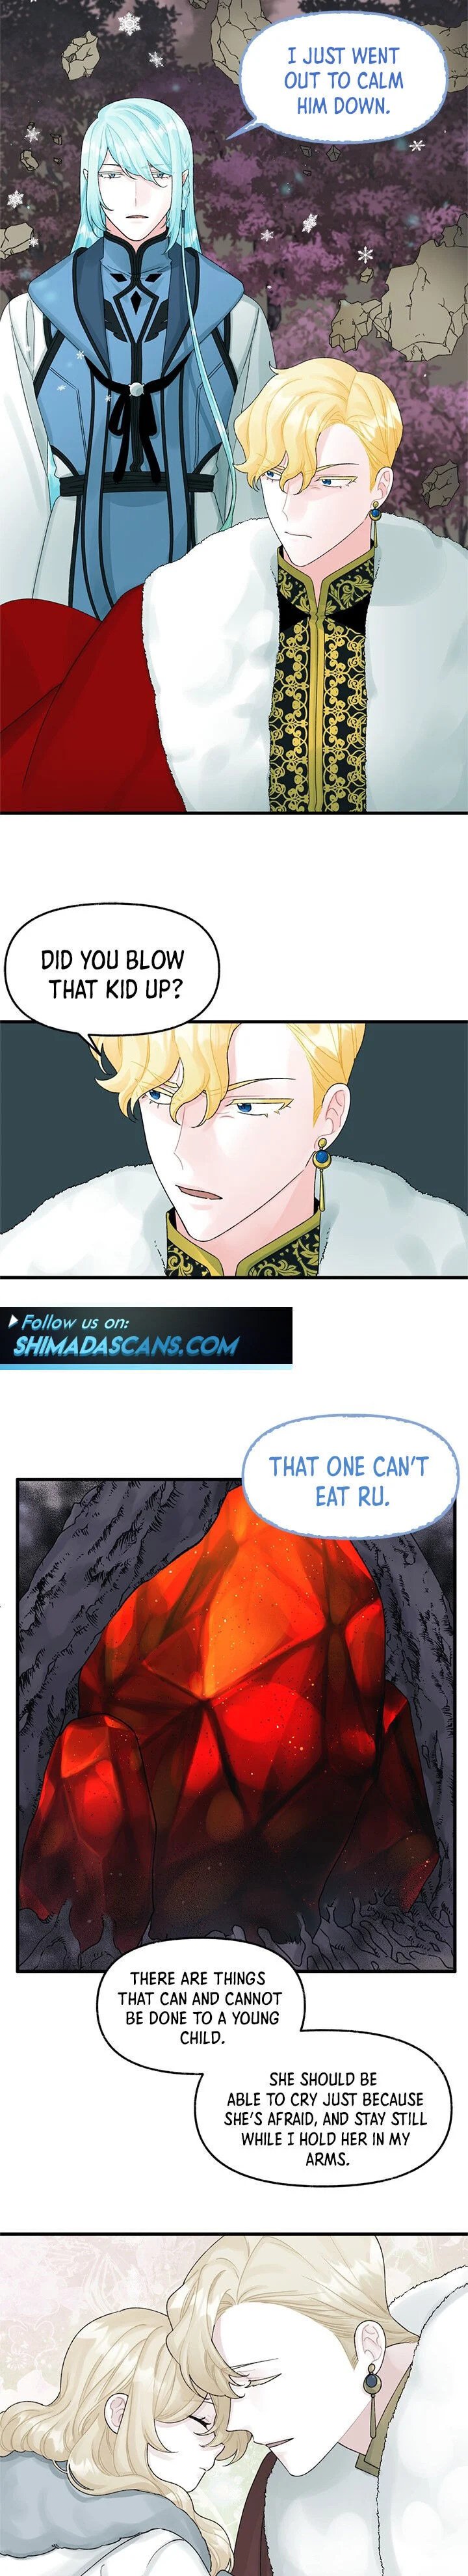 the-princess-in-the-dumpster-chap-44-6